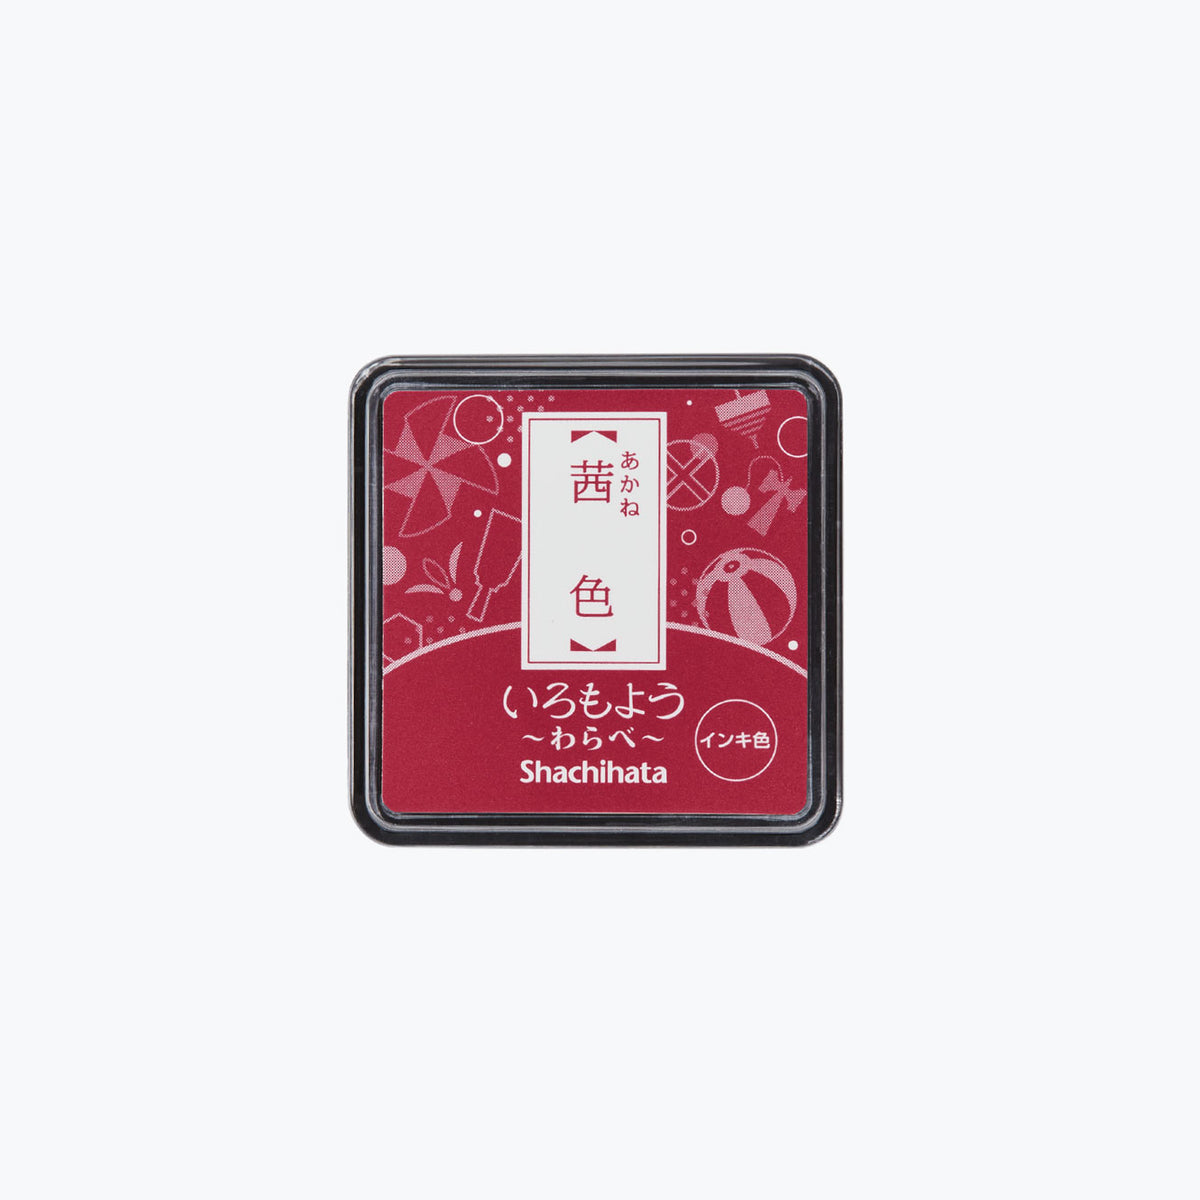 Shachihata - Stamp Pad - Oil-Based Ink - Iromoyo - Mini - HAC-S1-DR